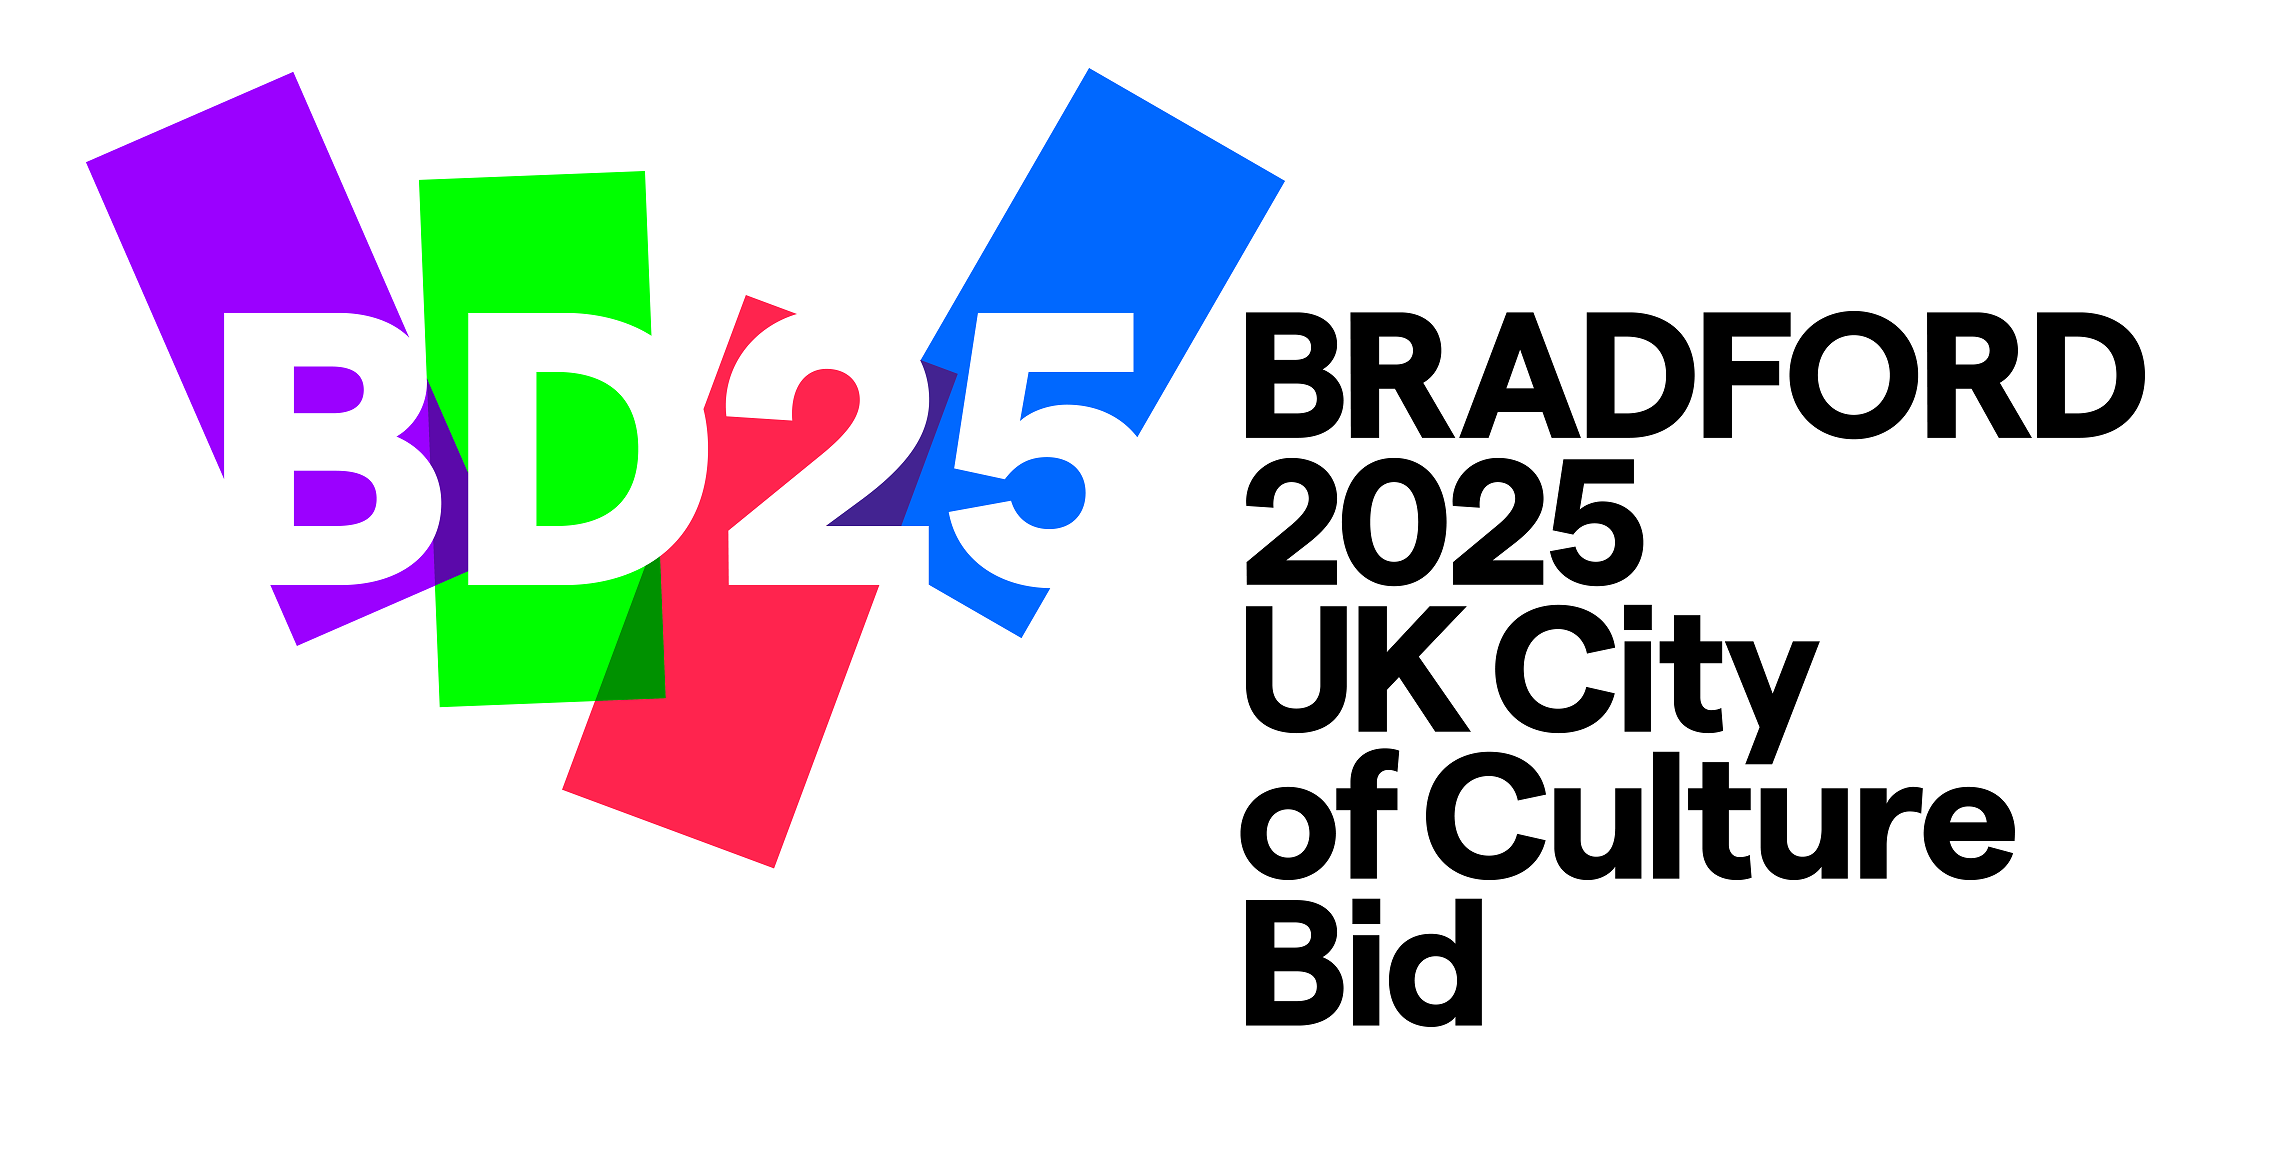 Bradford Means Business supports the Bradford City of Culture BID 2025